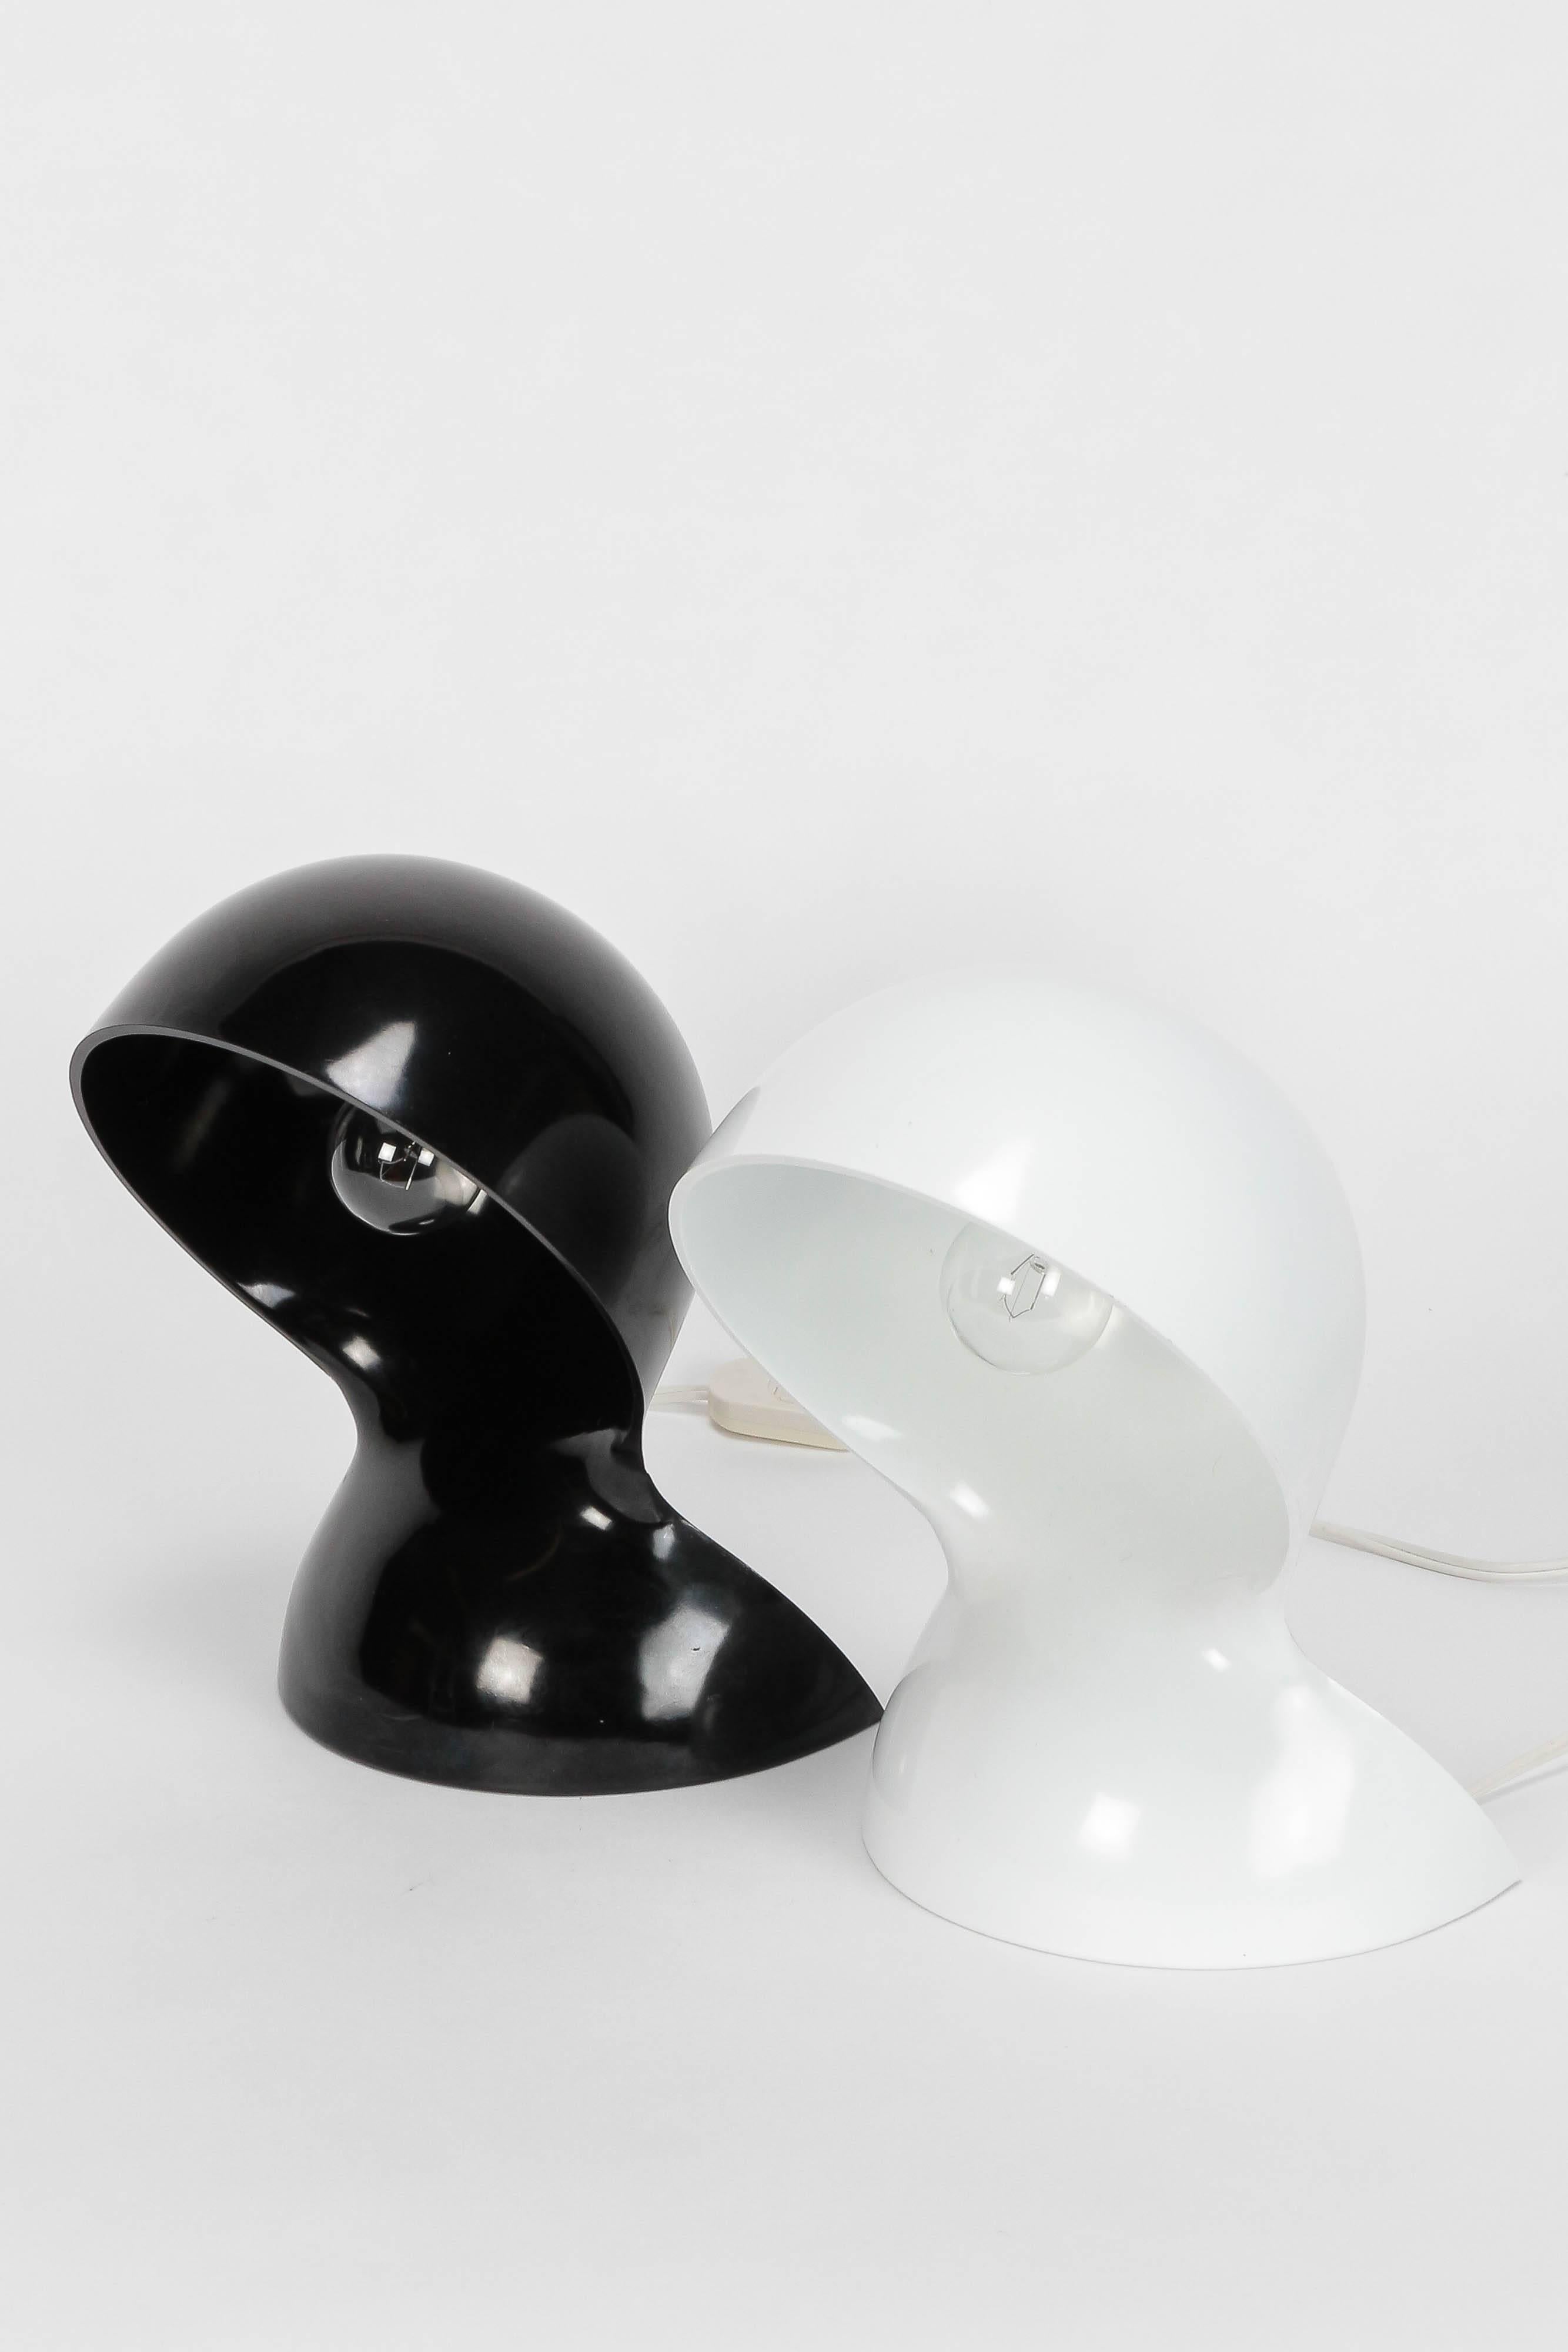 Wonderful pair of Dalù table lamps designed by Vico Magistretti in 1969 for the Italian manufacturer Artemide, early version made of black and white melamine. The incredible one-piece design of the Dalù lamp is an absolute icon of modern design.